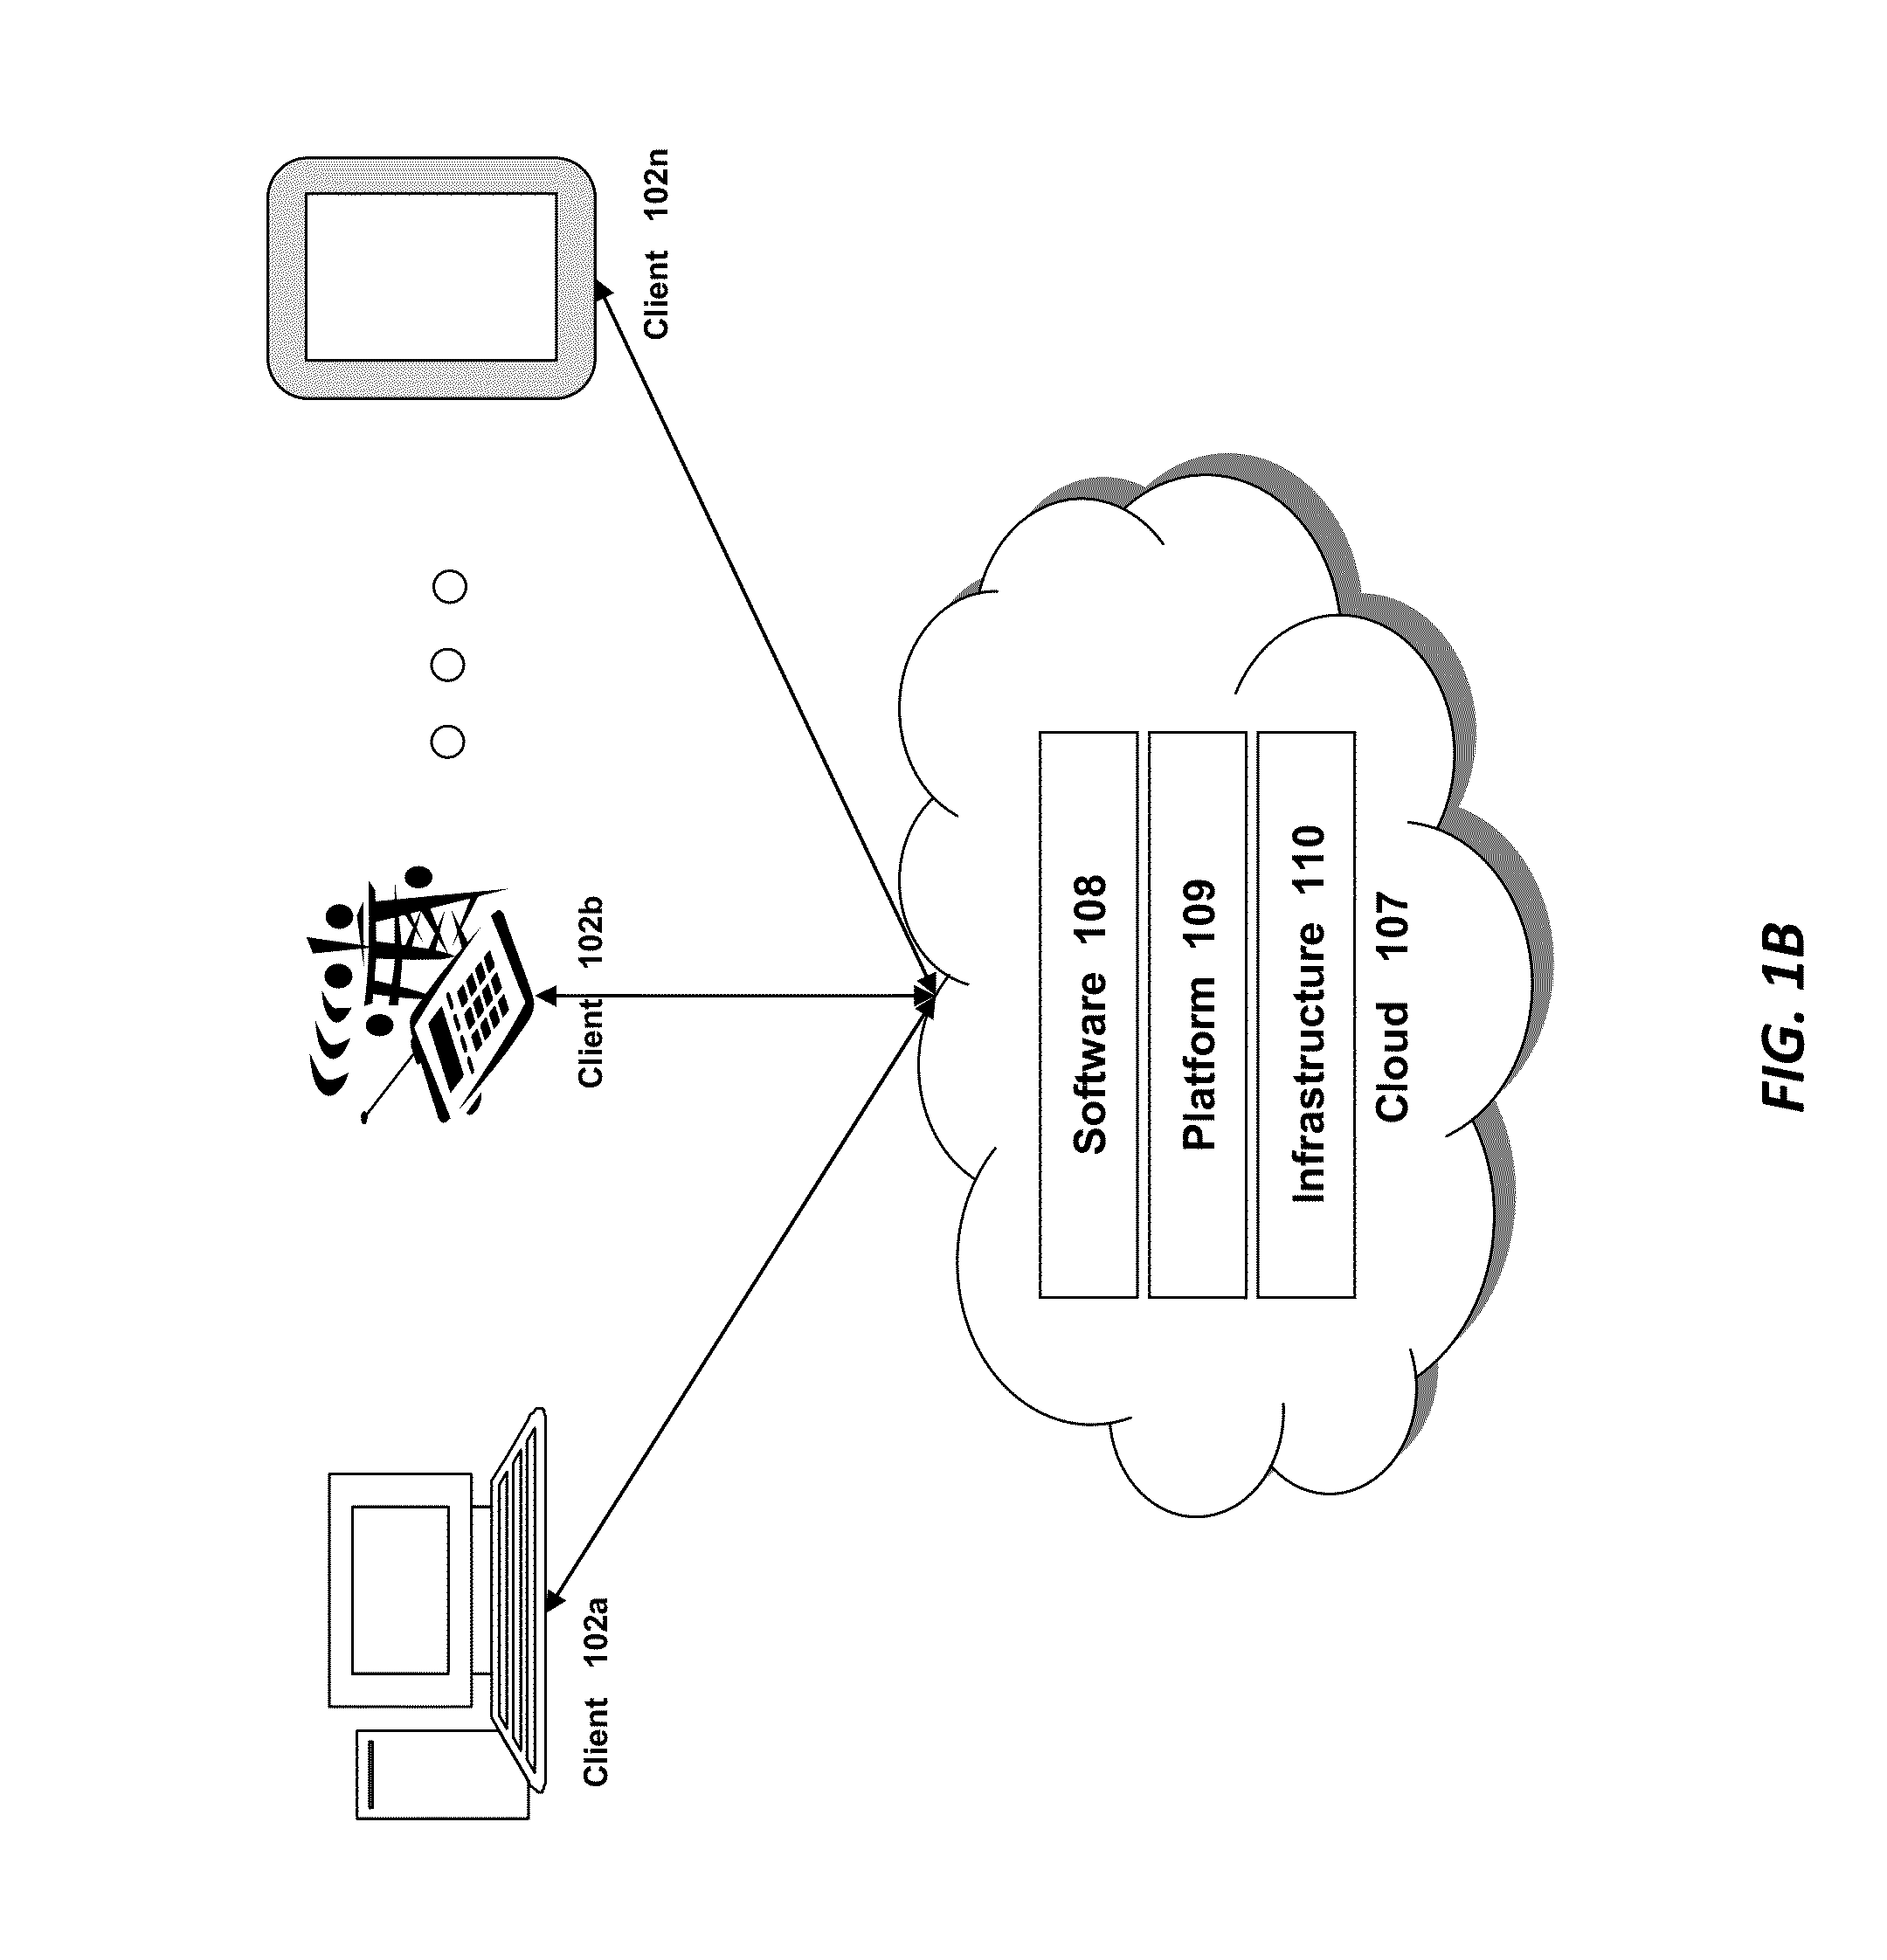 Systems and methods for obtaining in building location data for VOIP phones from network elements